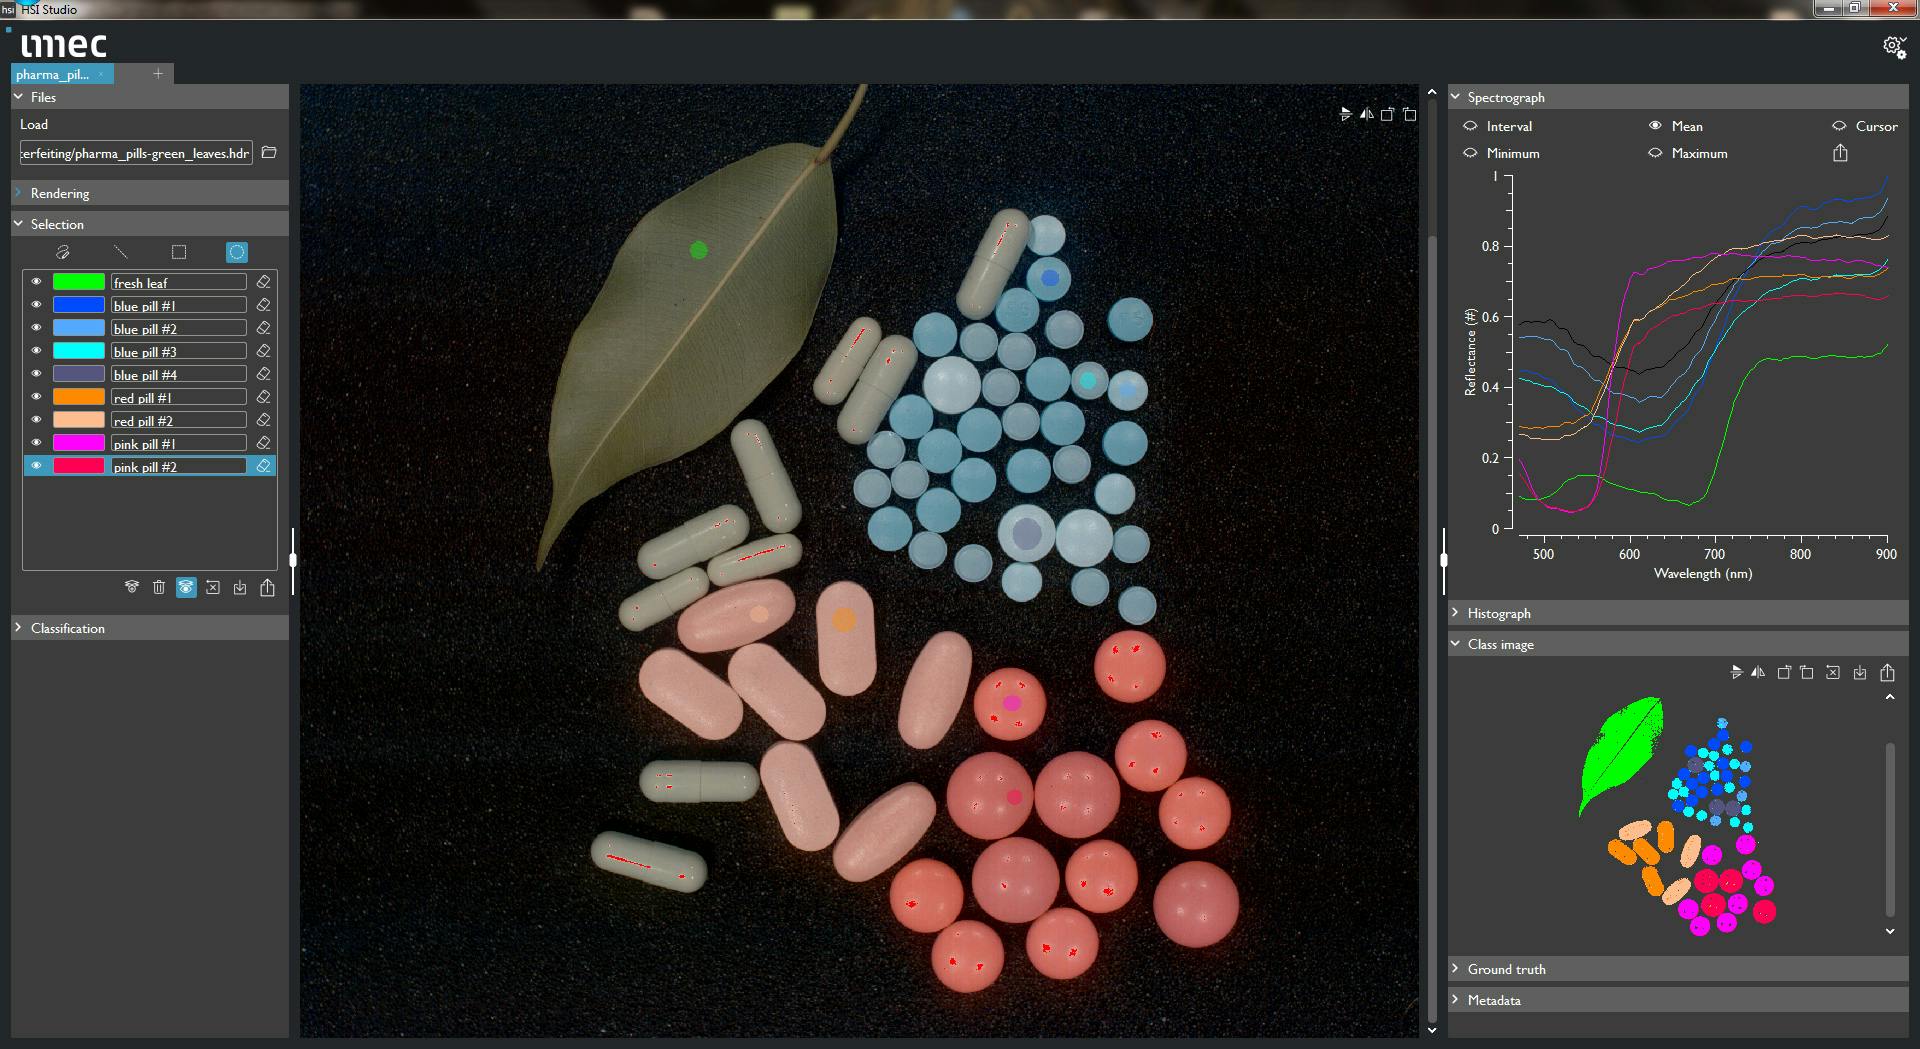 pharma pills classified mean spectras color